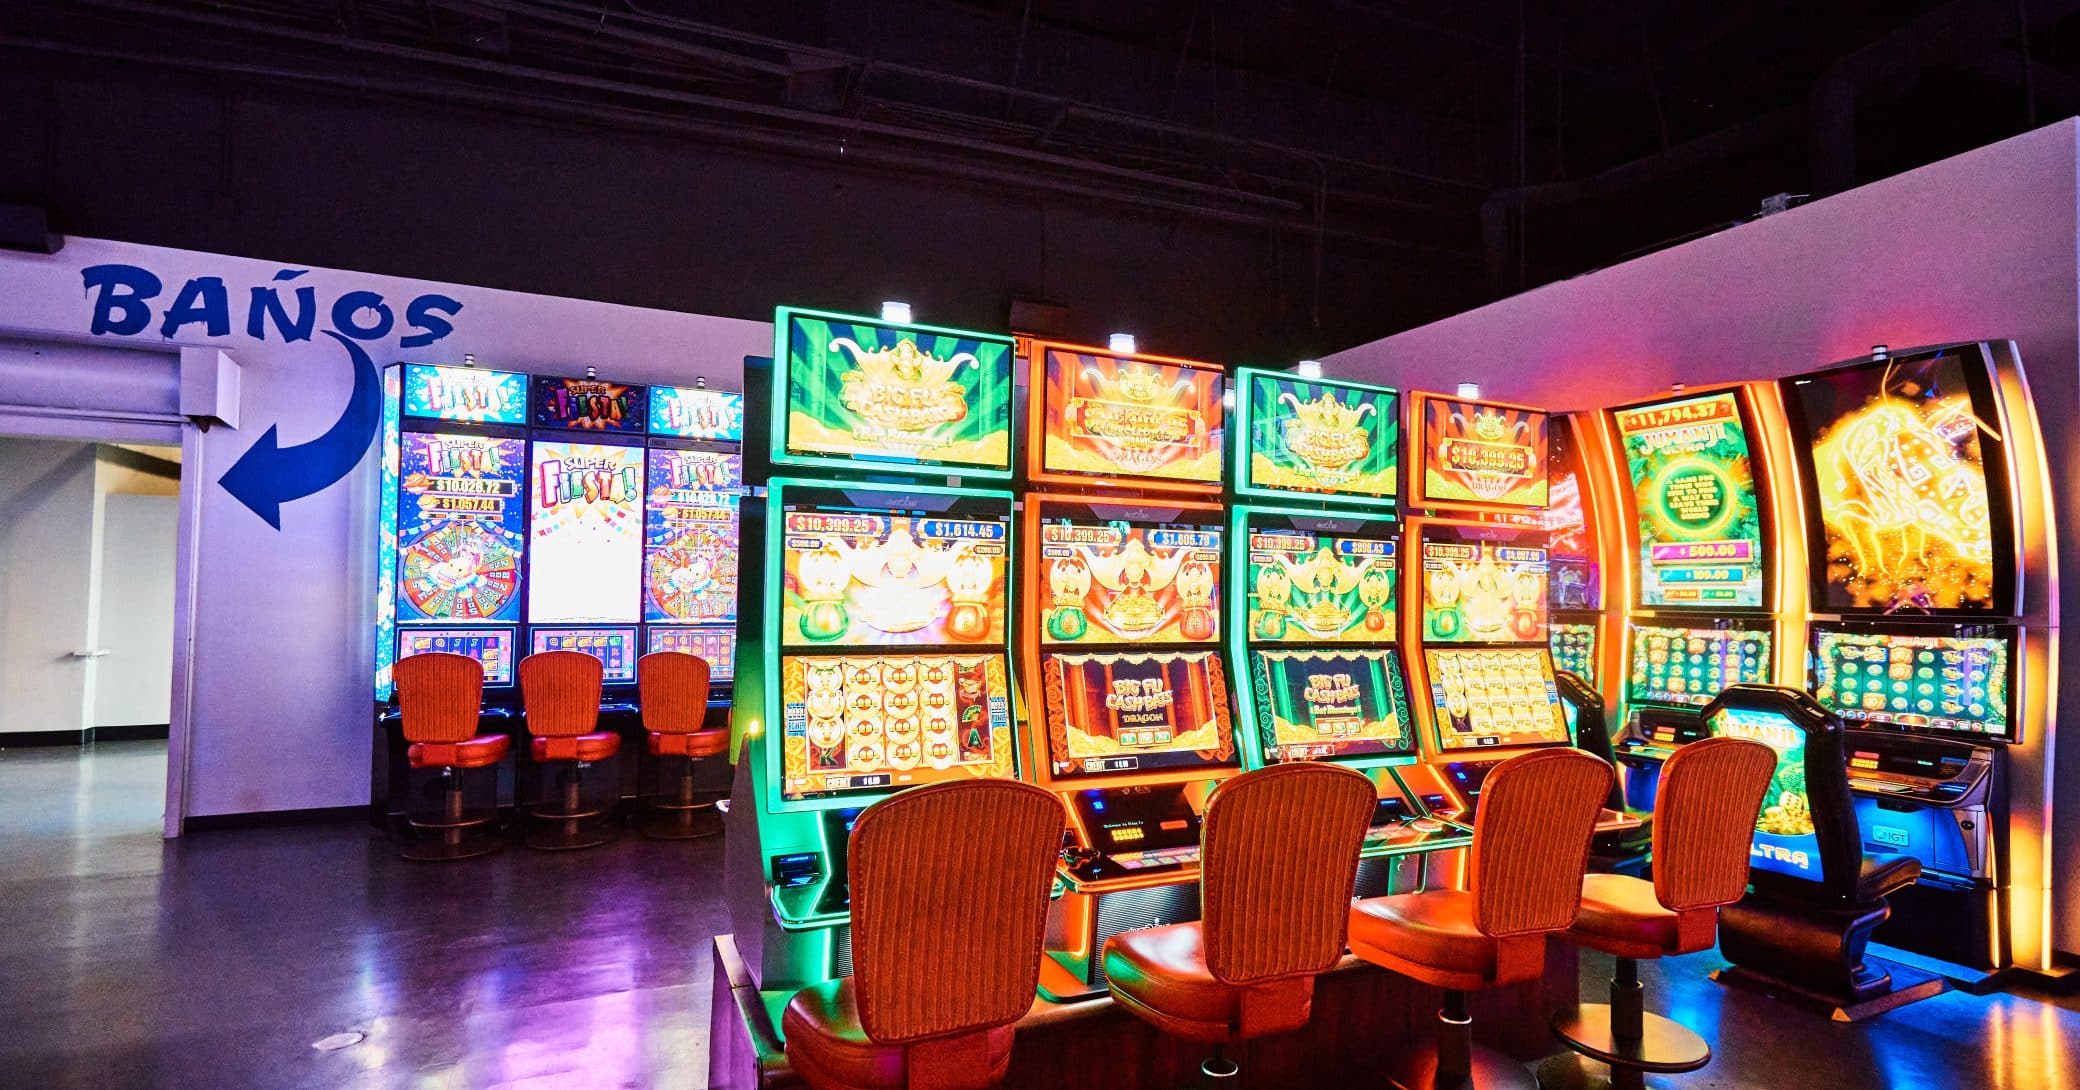 Kalb Industries completed a tenant casino improvement renovation for Ojos Locos Casino and Jefe Sports Book.